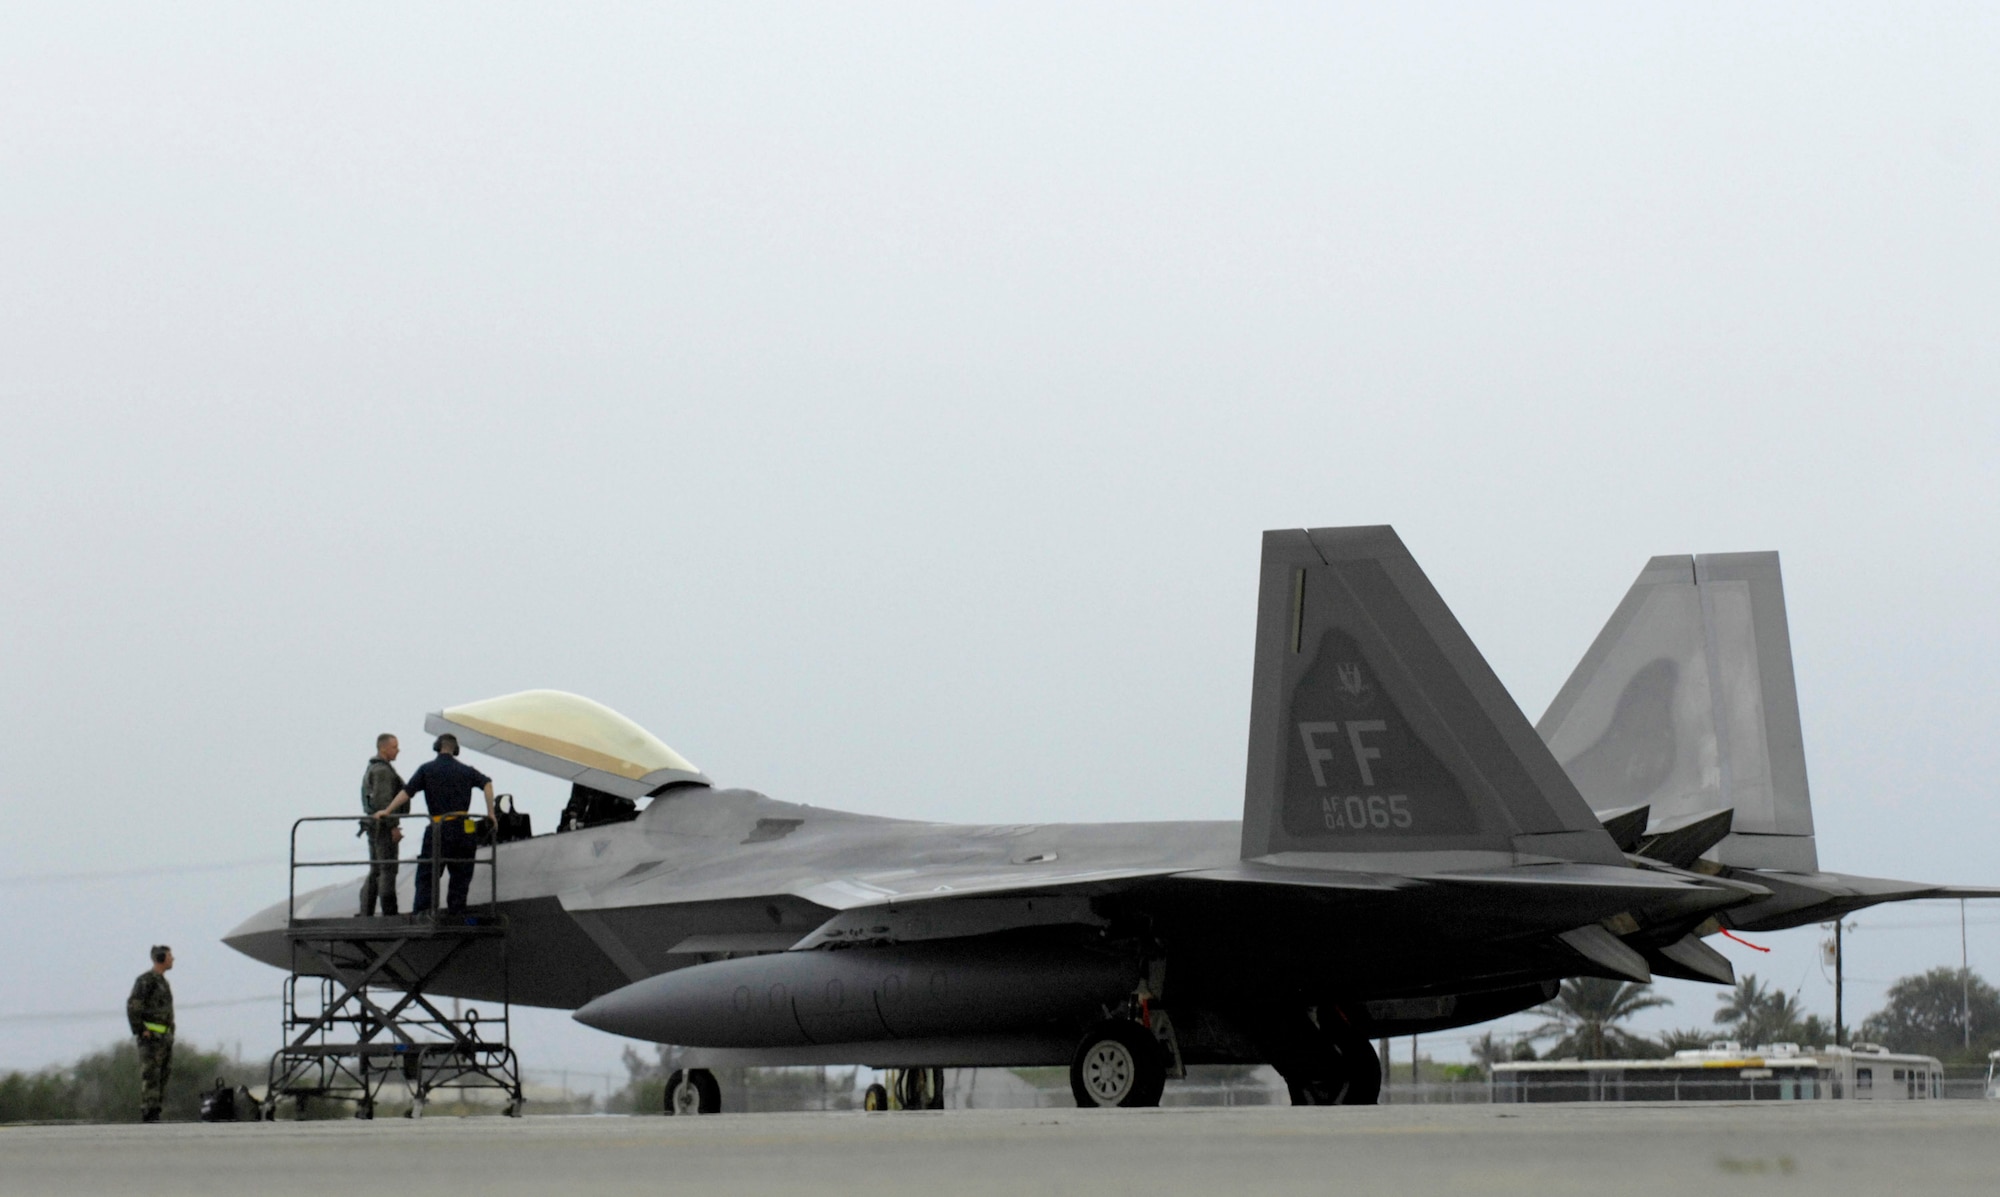 A crew chief talks to the pilot of an F-22 Raptor after parking Feb. 7 at Hickam Air Force Base, Hawaii. The F-22s and more than 250 Airmen from the 27th Fighter Squadron at Langley Air Force Base, Va., are bound for Kadena Air Base, Japan, for the aircraft's first overseas operational deployment. (U.S. Air Force photo/Tech. Sgt. Shane A. Cuomo) 